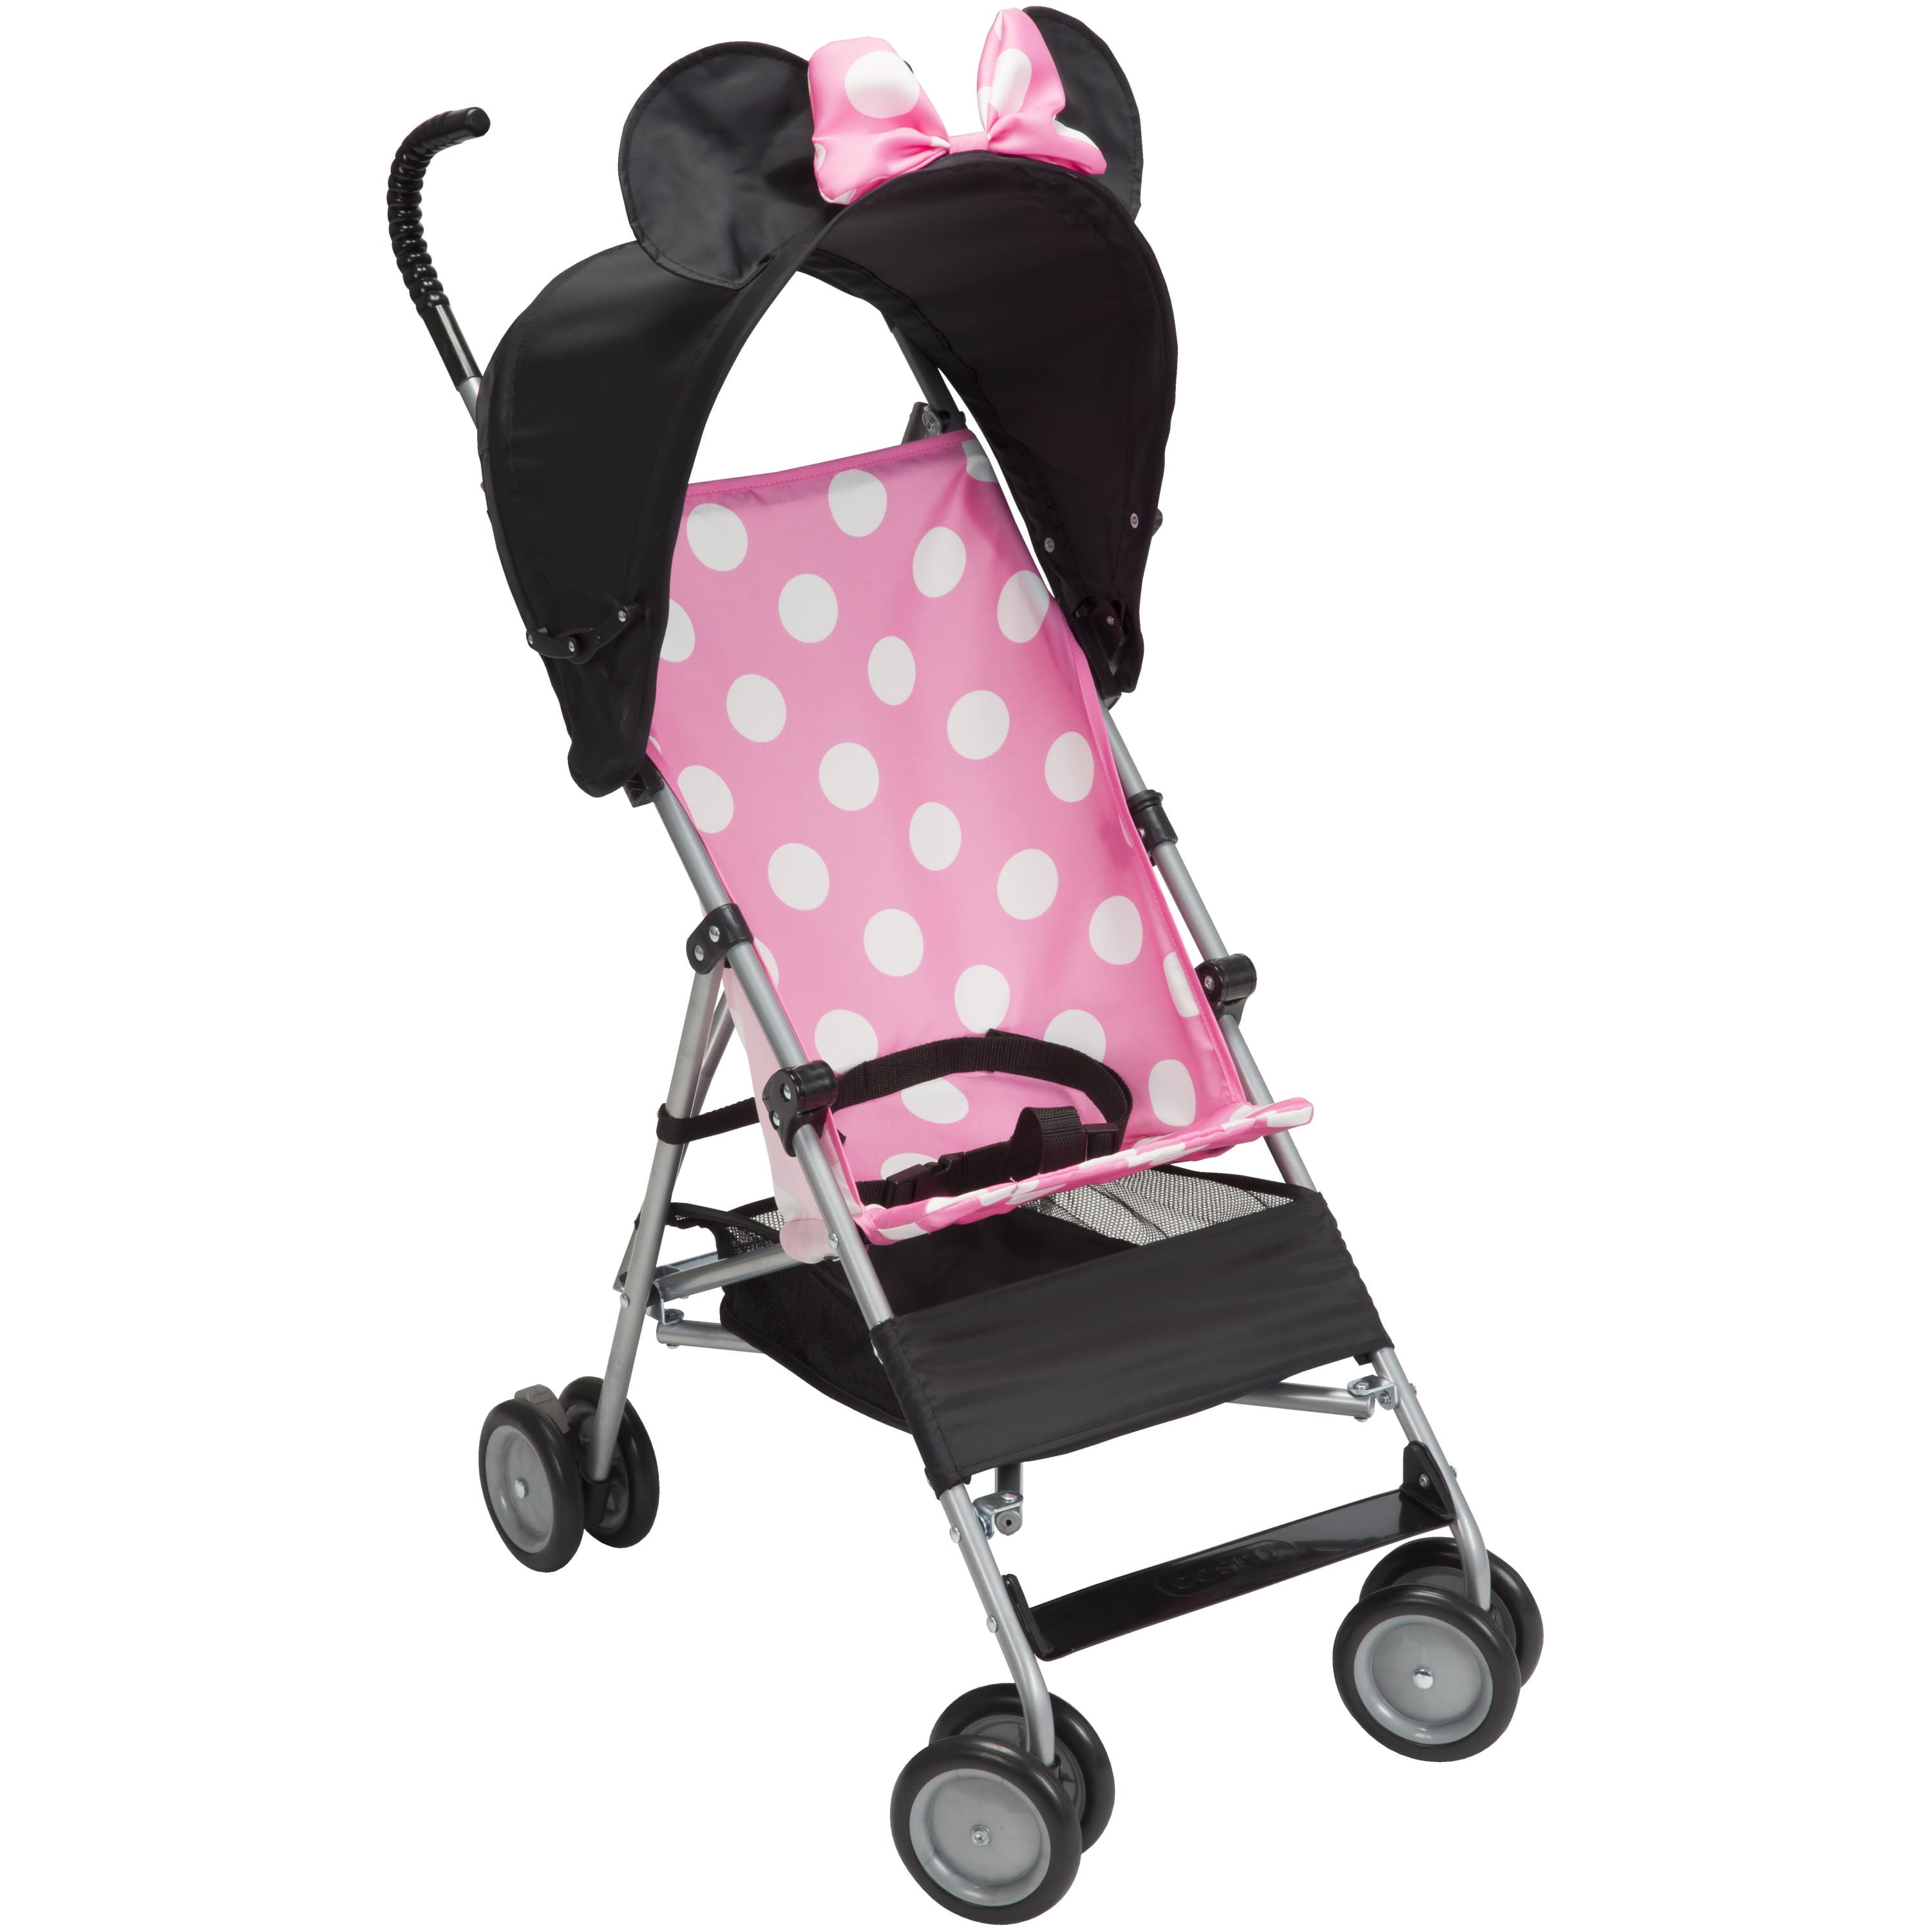 Disney Baby Character Umbrella Stroller with Basket, Pink Minnie 3D